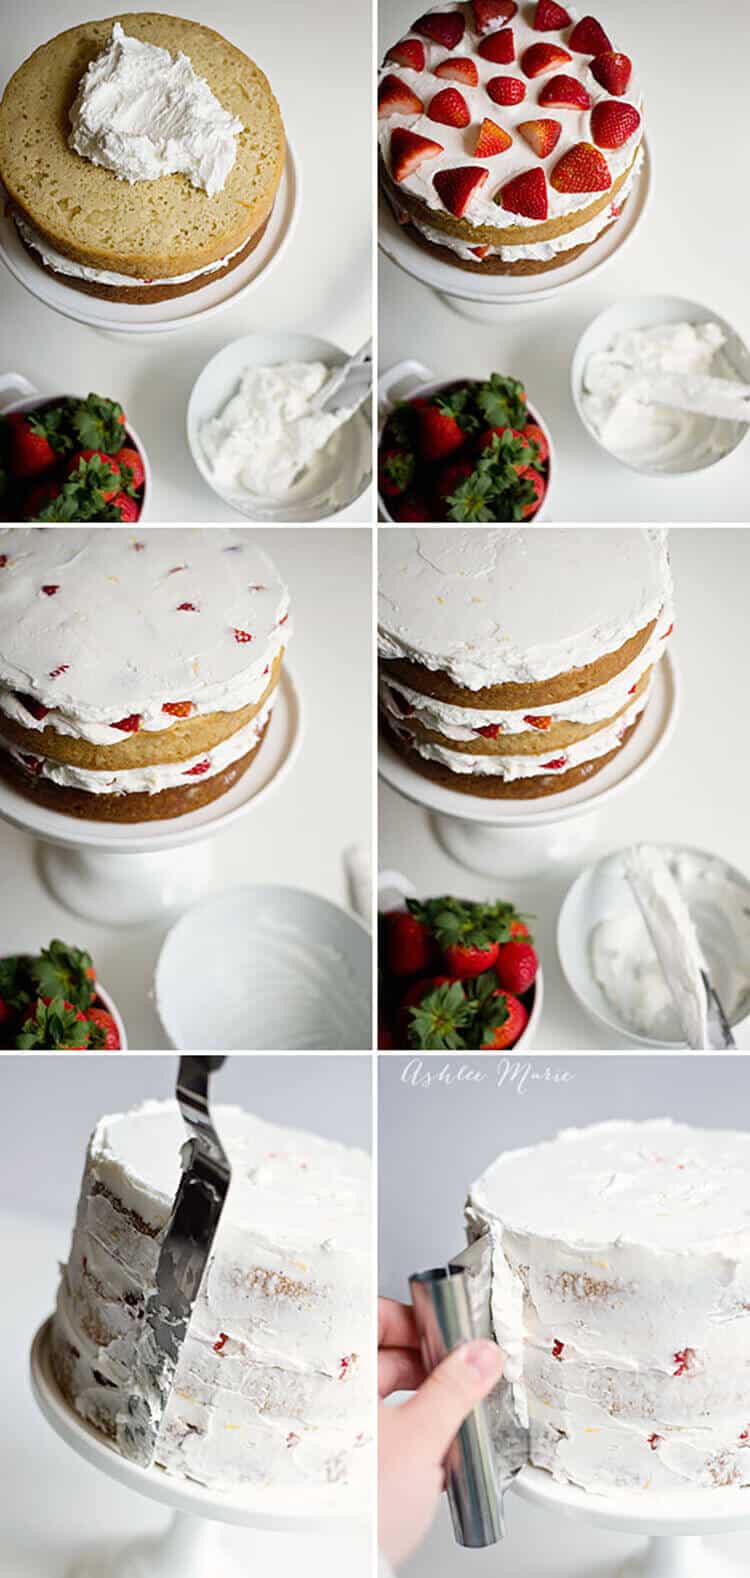 Making a naked cake is super easy, you can leave the sides plain or frost then scrape off to get a lighter look